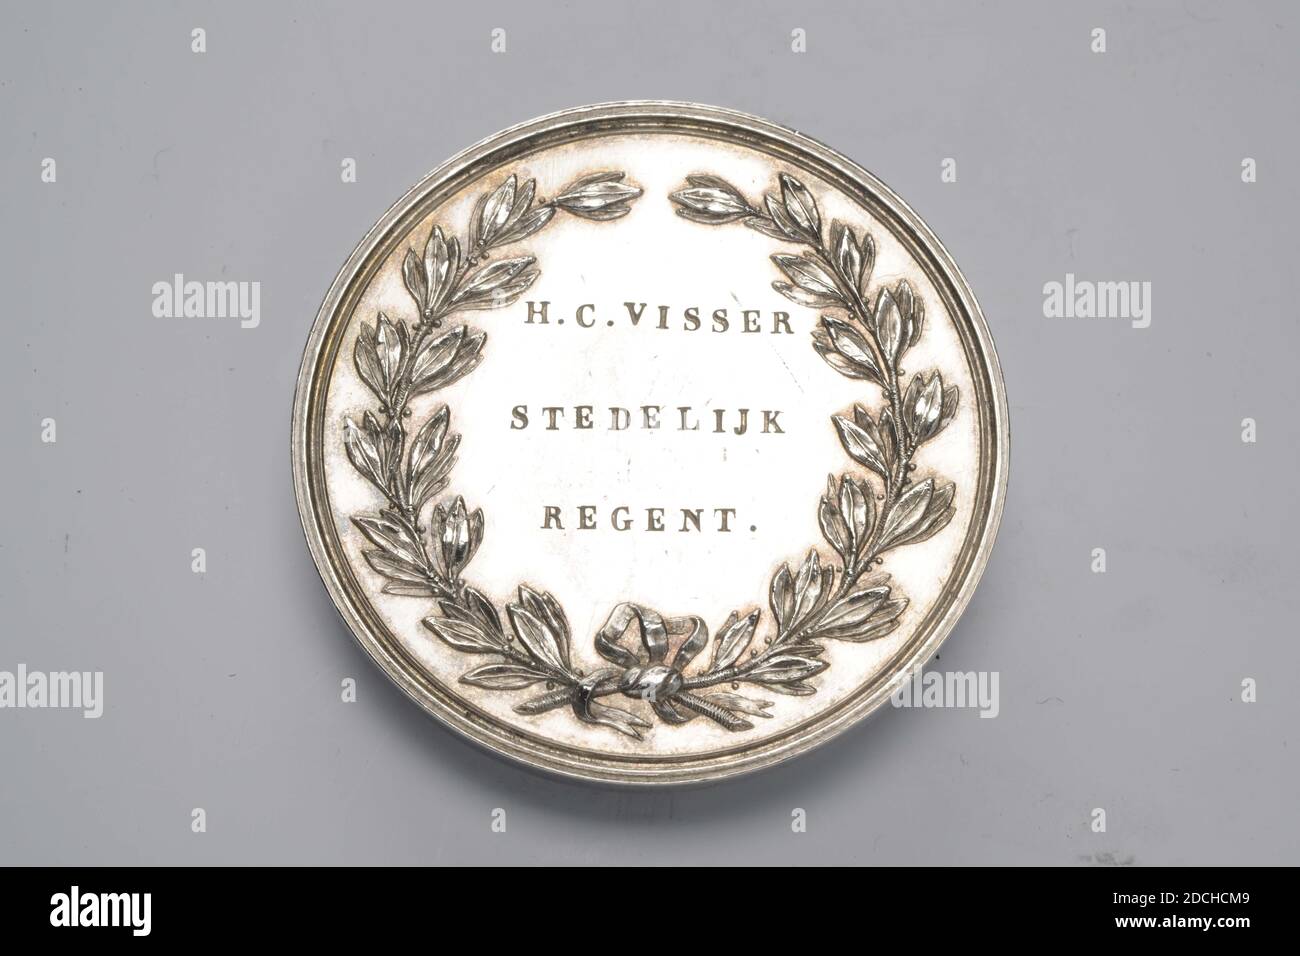 medal, Anonymous, 1853, Silver medal in 1853, honored to H.C. Fisherman as urban rain of poor. A three-line inscription is engraved on the front within a laurel wreath: H.C. VISSER STEDELIJK REGENT .. On the back an eight-line inscription in relief: MEMORIES FOR PROVEN SERVICES AS REGENT DER H.Z. AND D. ARMEN VAN LEIJDEN 1848 TO 1853, General: 4.2 x 0.3cm (42 x 3mm), Weight: 31.7g Stock Photo